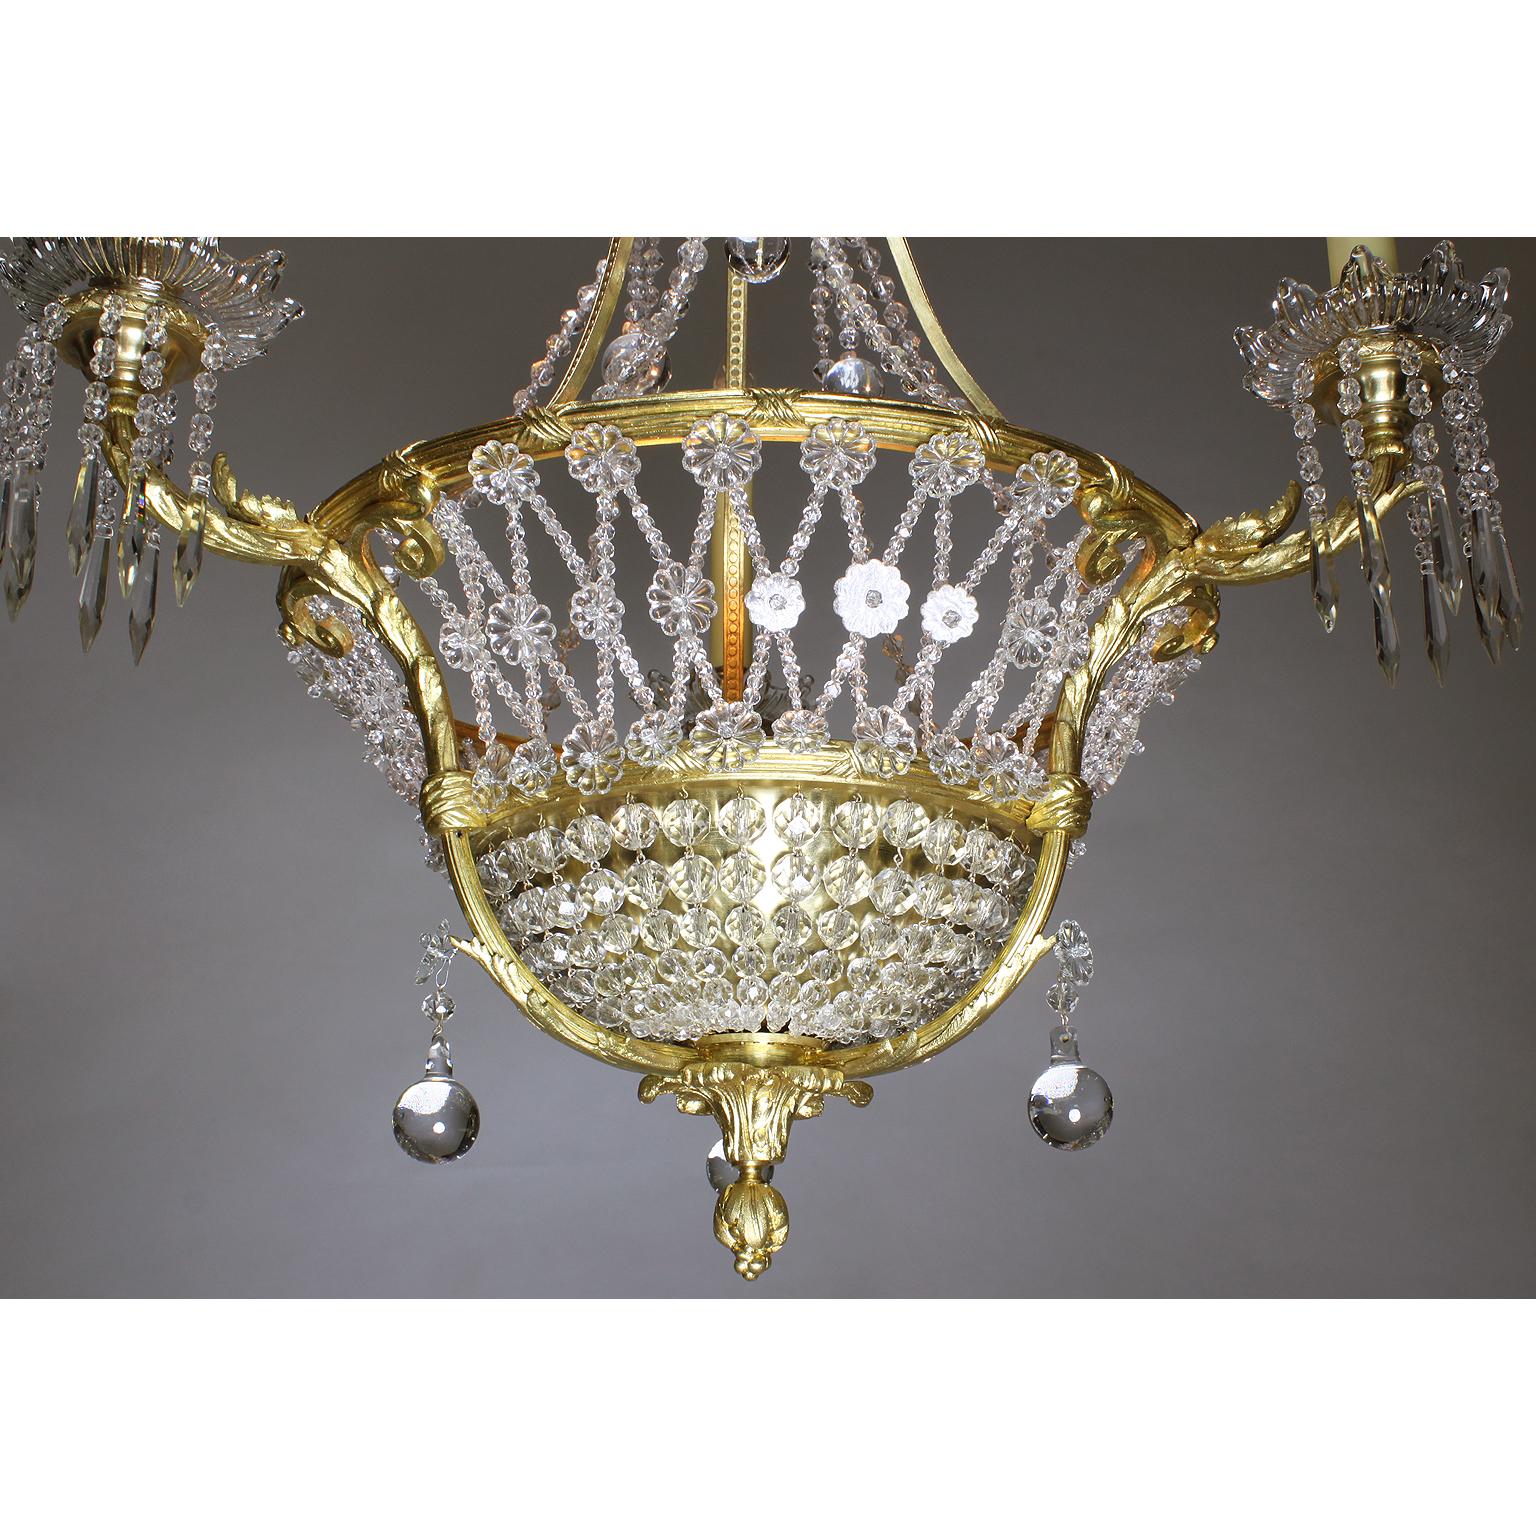 Fine French Belle Époque 19th-20th Century Gilt-Bronze and Cut-Glass Chandelier In Excellent Condition For Sale In Los Angeles, CA